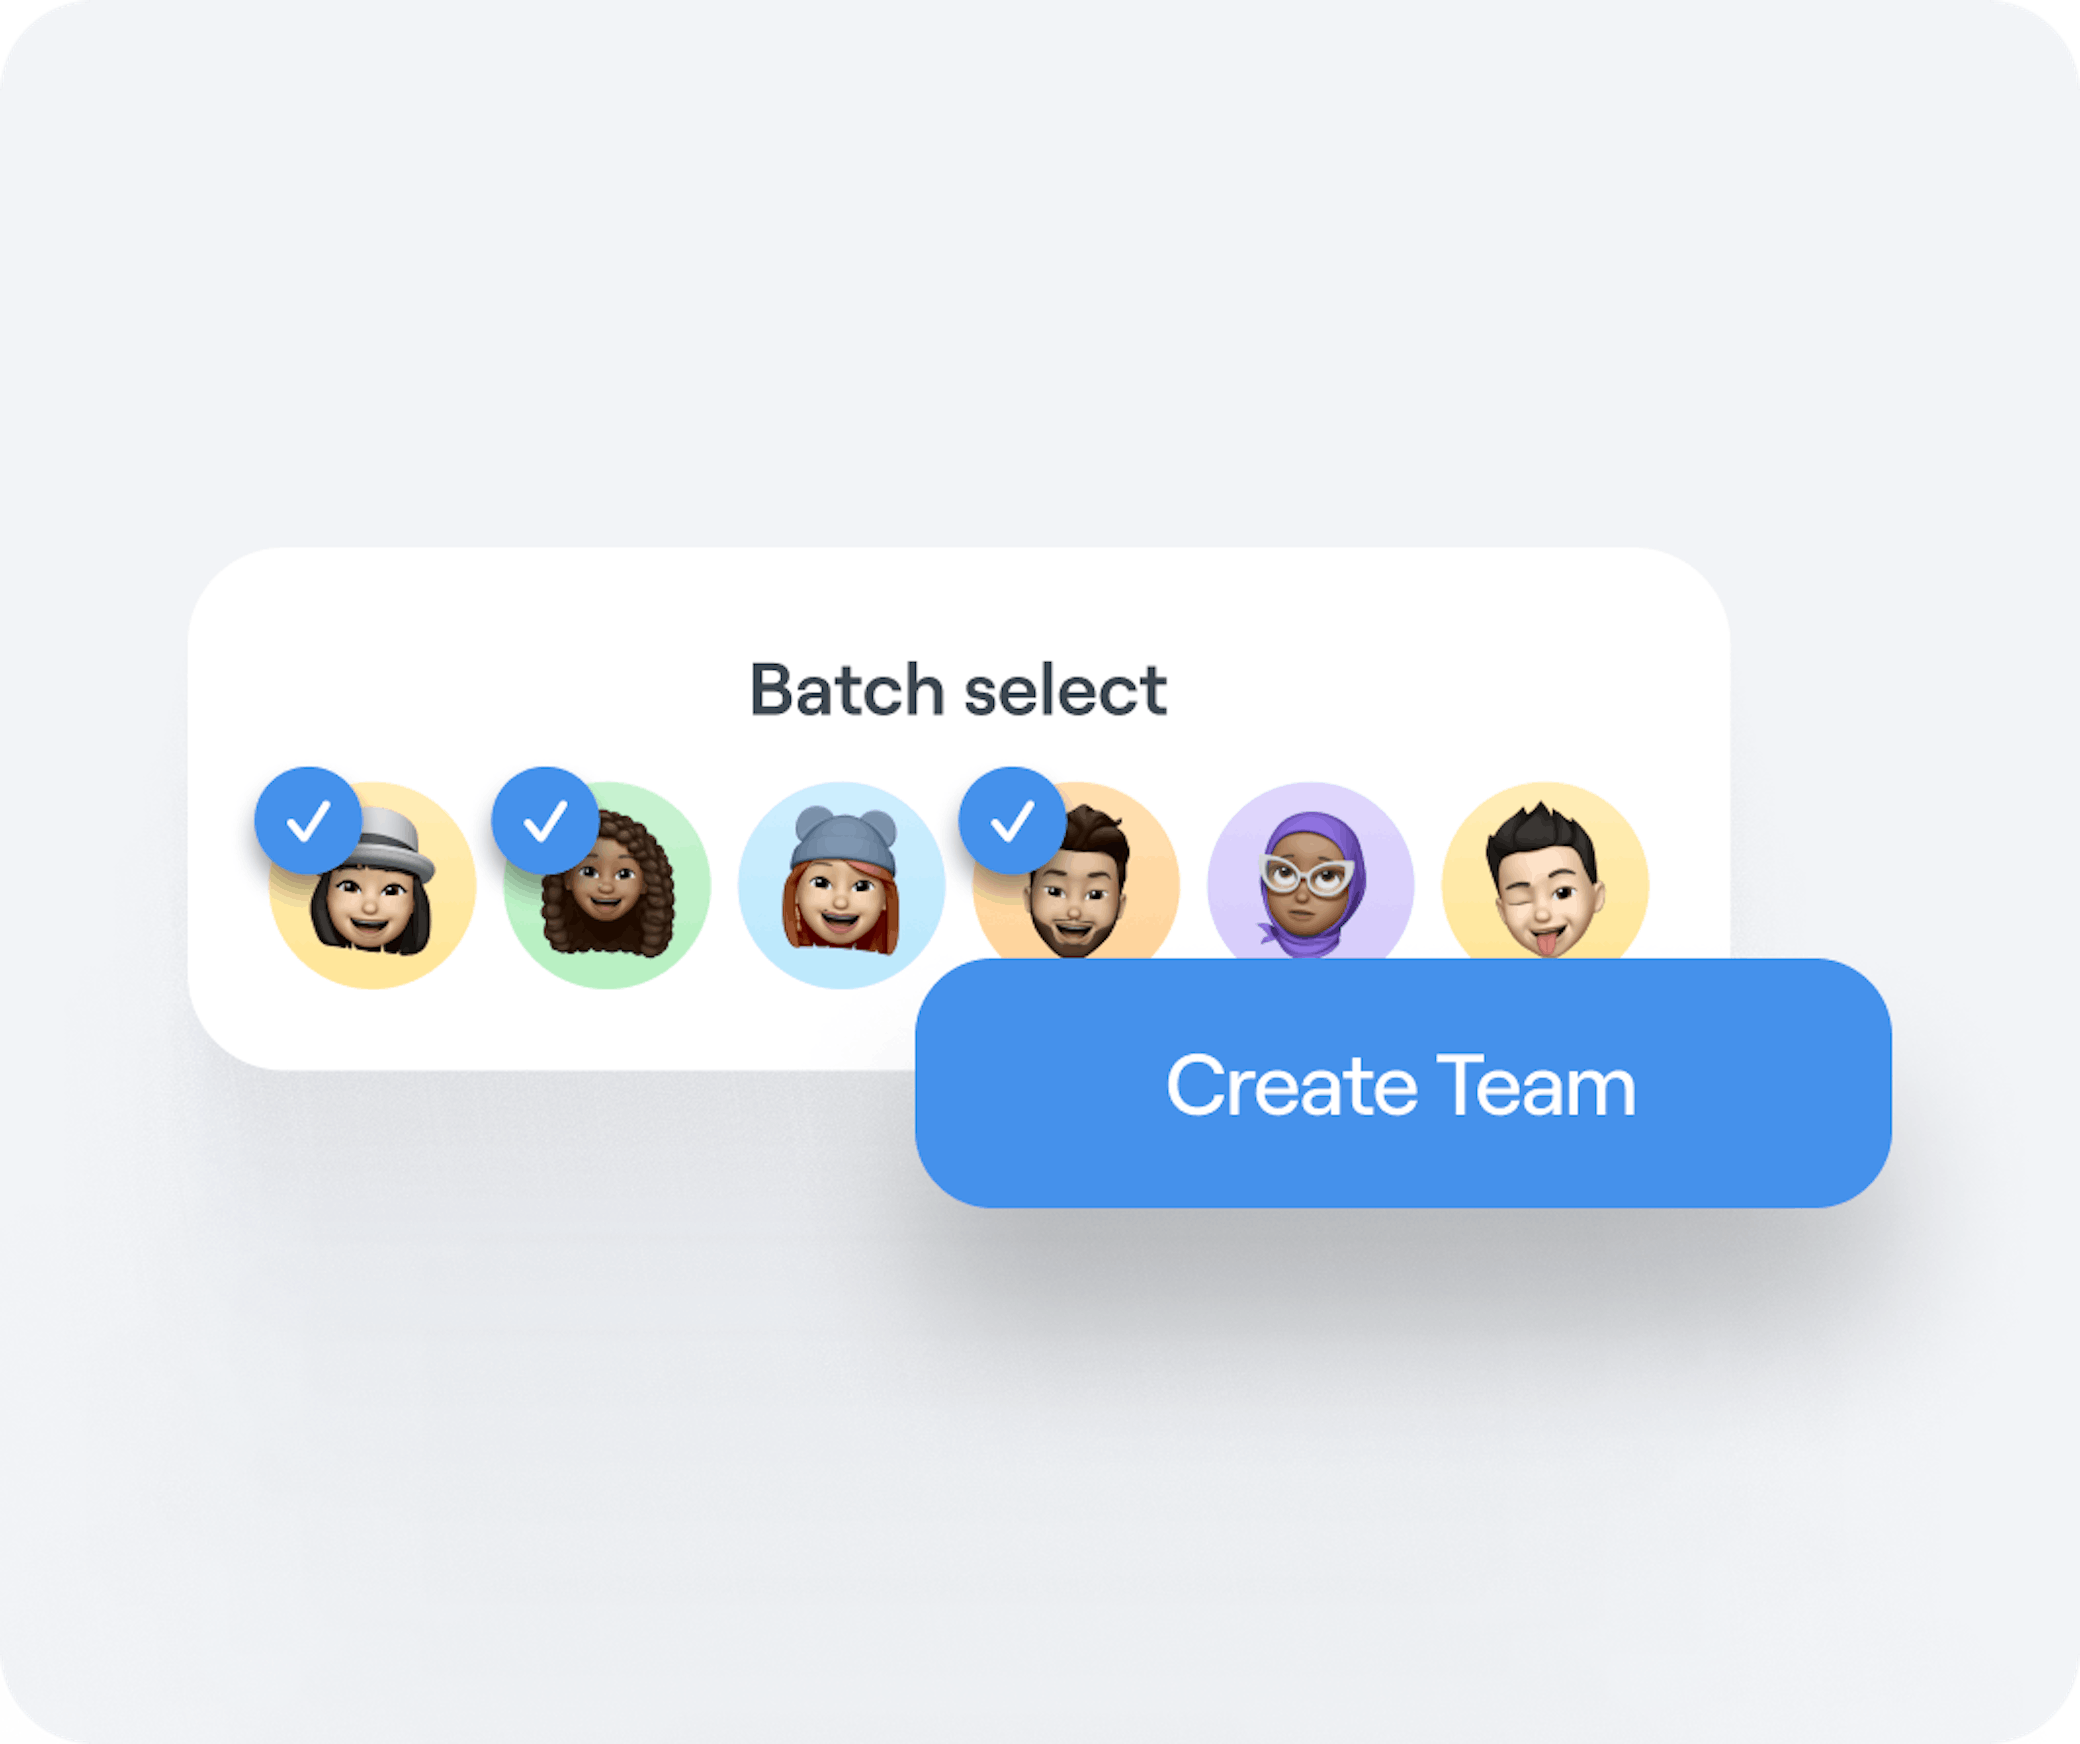 Interface graphic showing the creation of a team using Abler’s batch selection